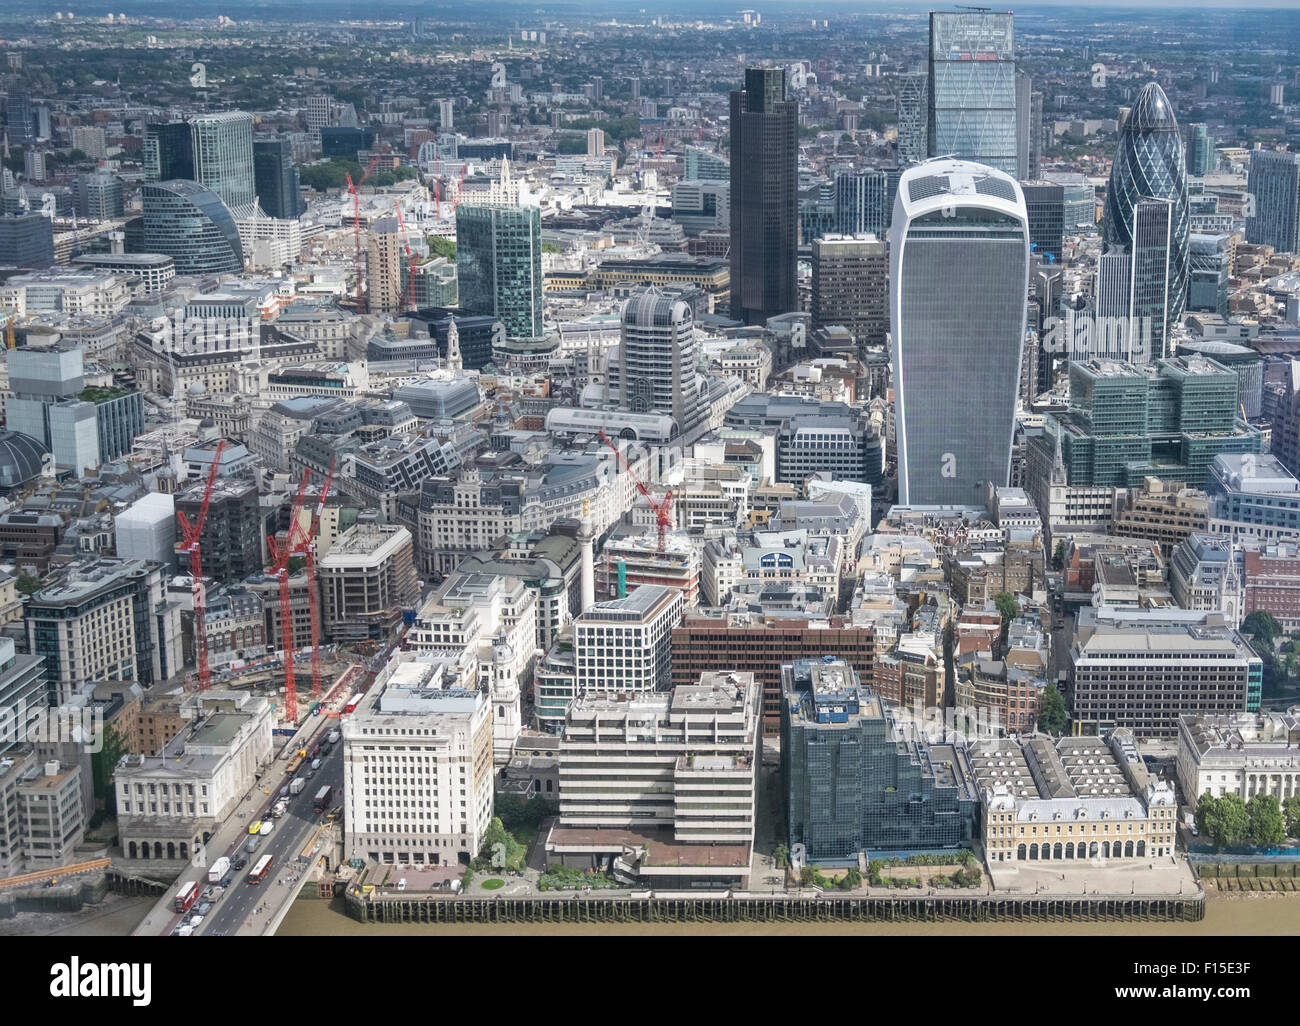 An aerial view of the city of London, England. Stock Photo